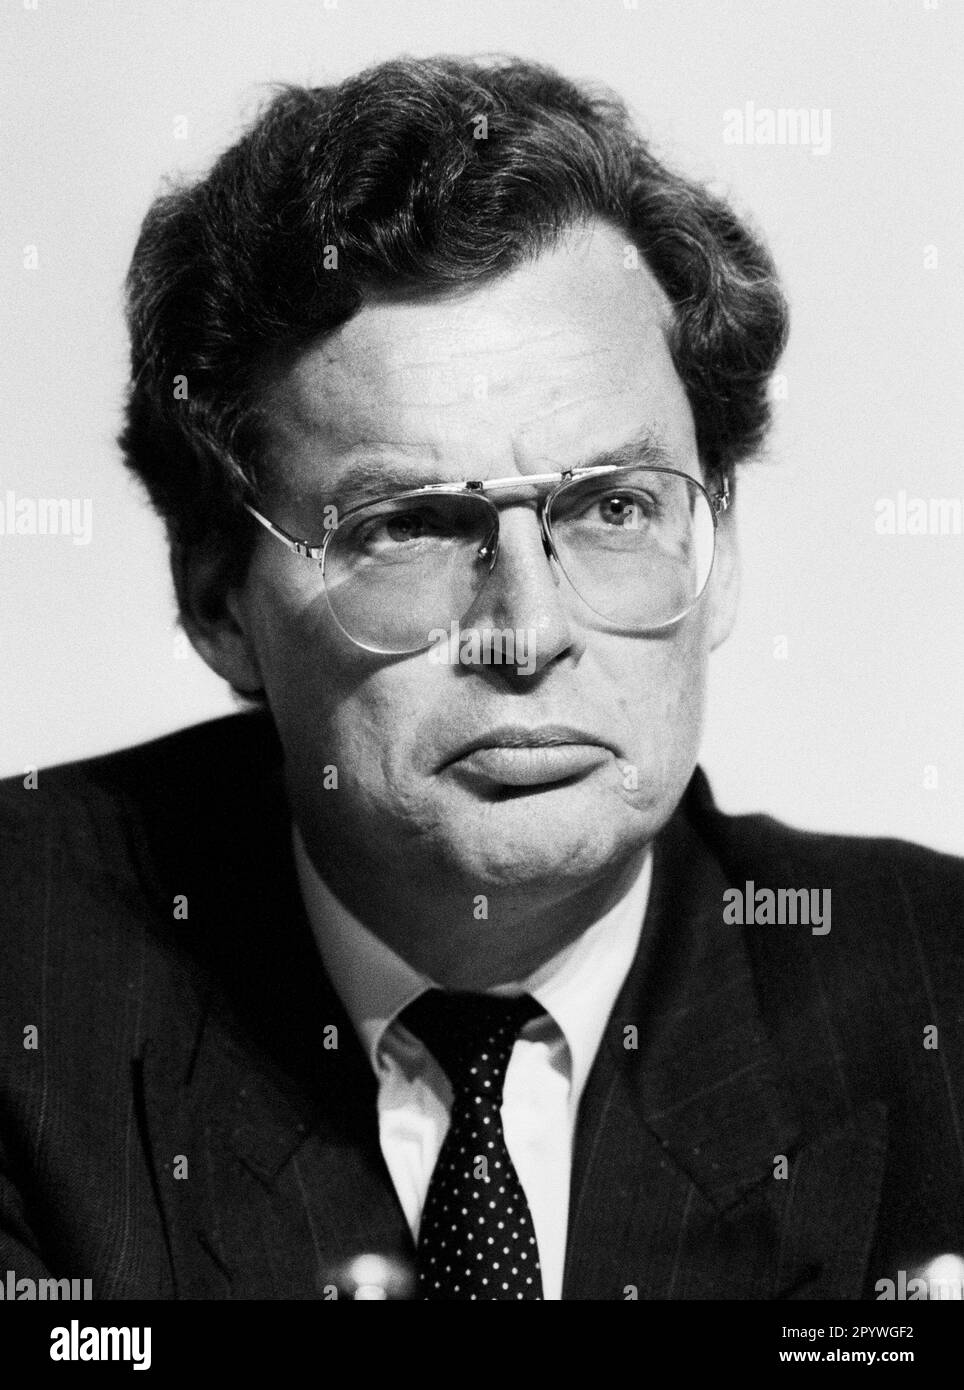 Gerhard CROMME , Chairman of the Executive Board of Fried. Krupp AG Hoesch-Krupp , May 1994 [automated translation] Stock Photo